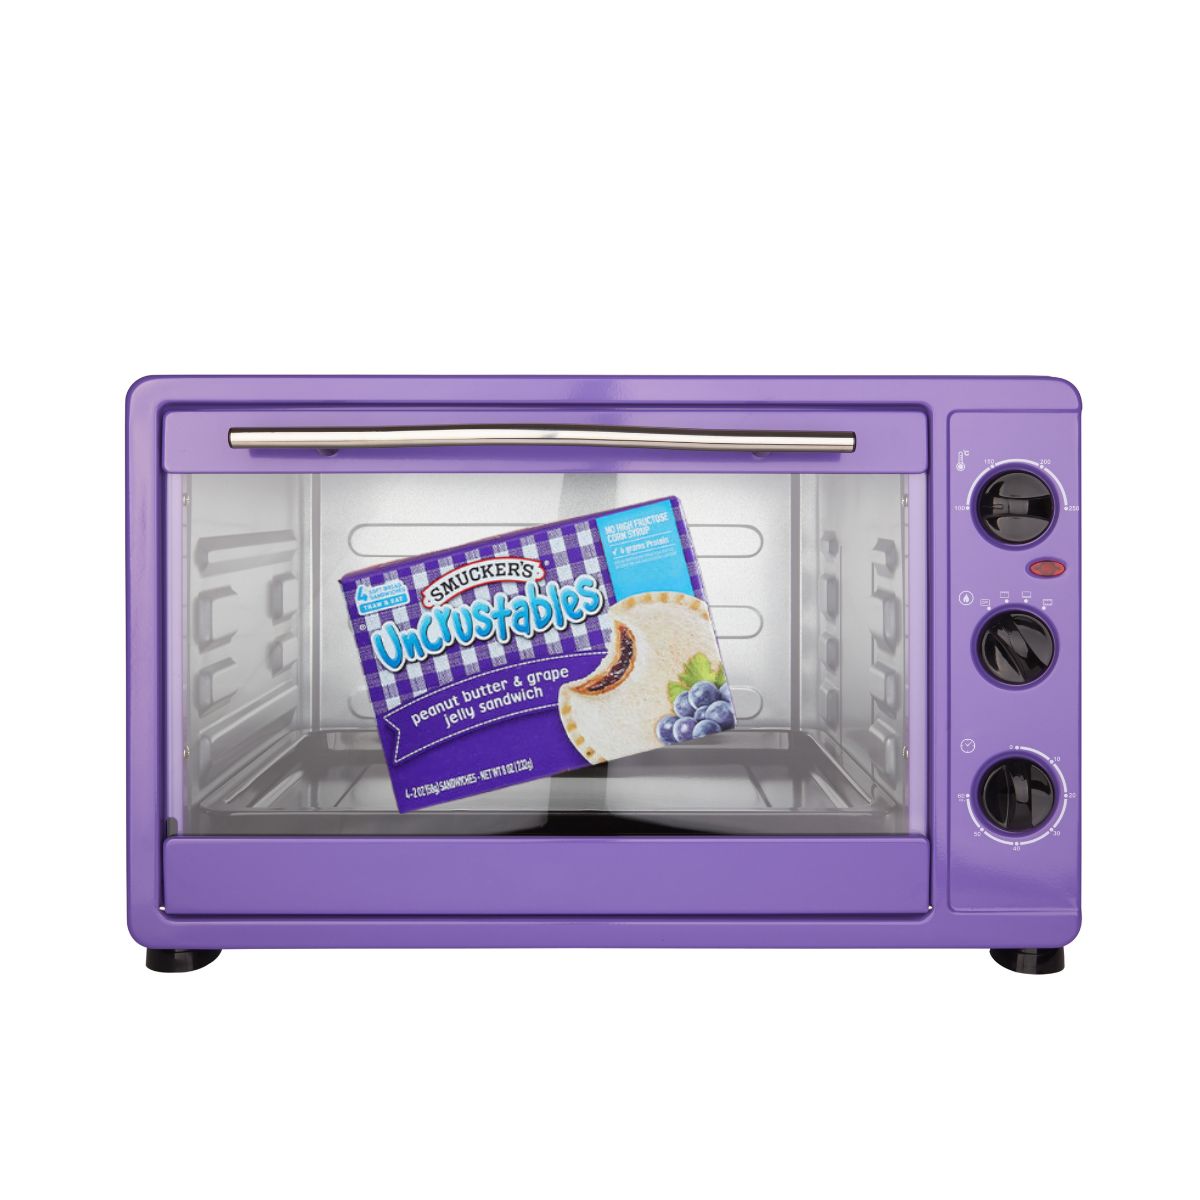 Purple toaster oven with grape uncrustables inside.